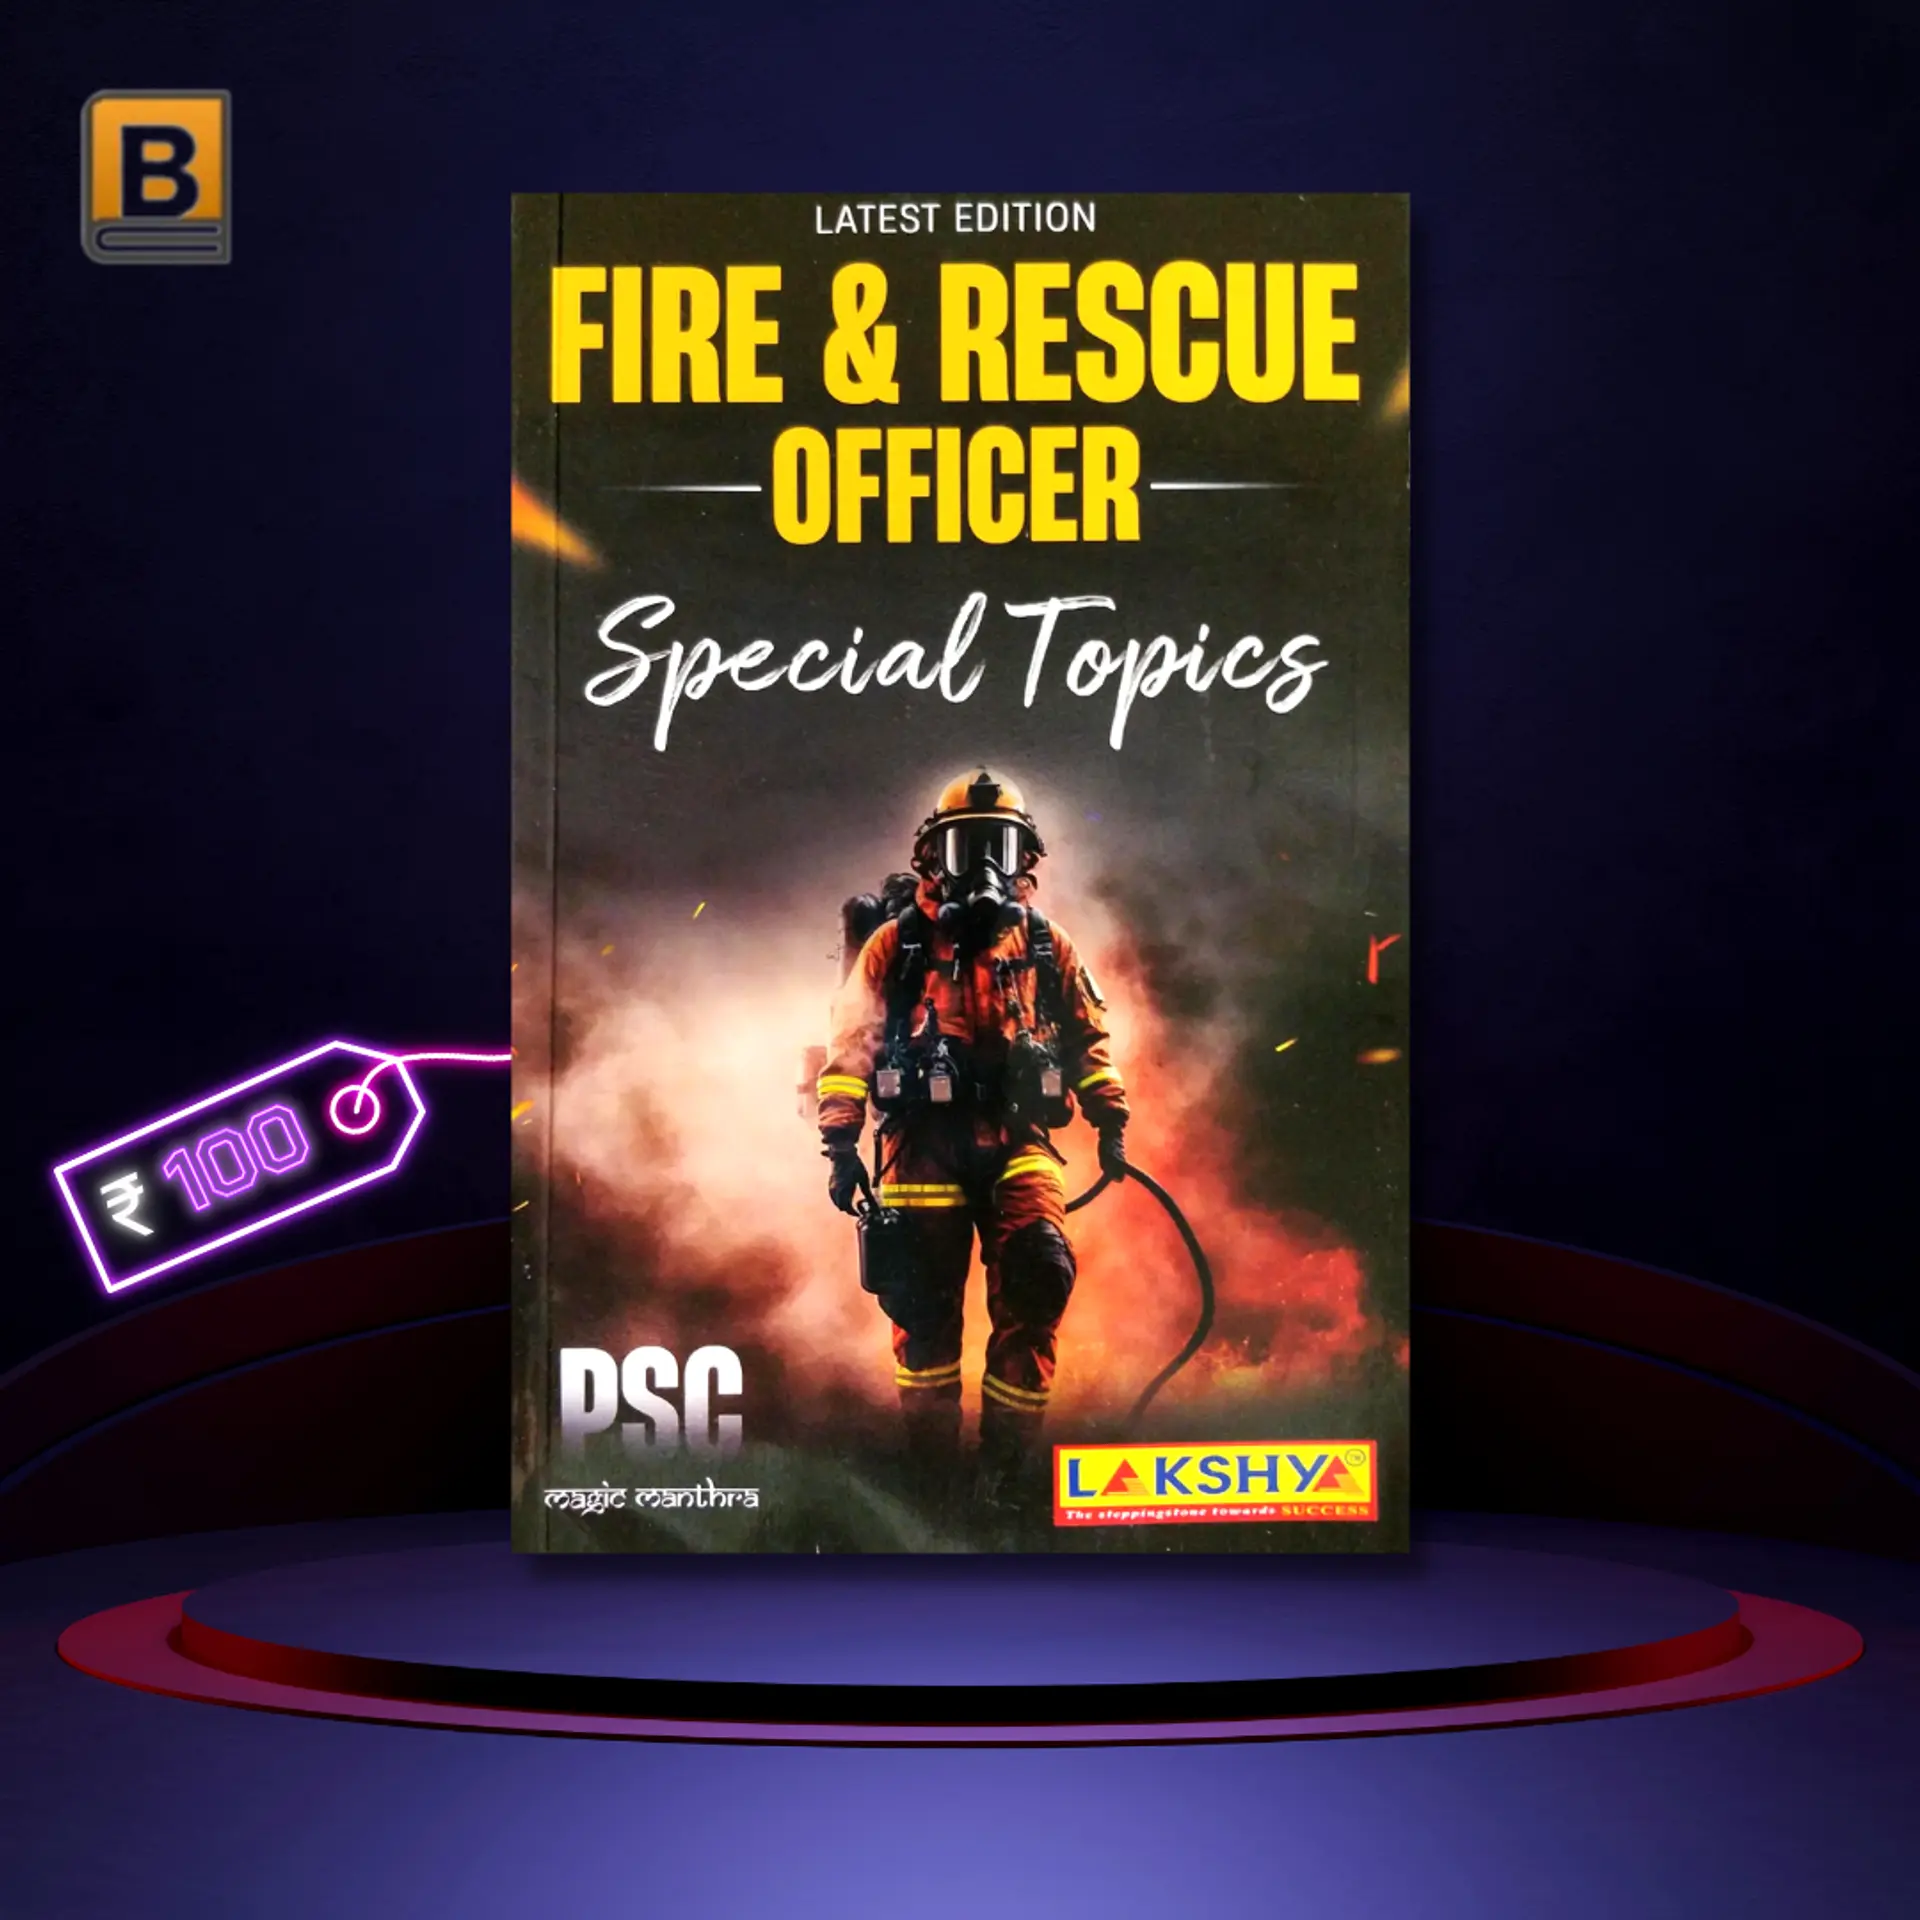 Kerala PSC Fire and Rescue Officer Special Topics | Lakshya Publications